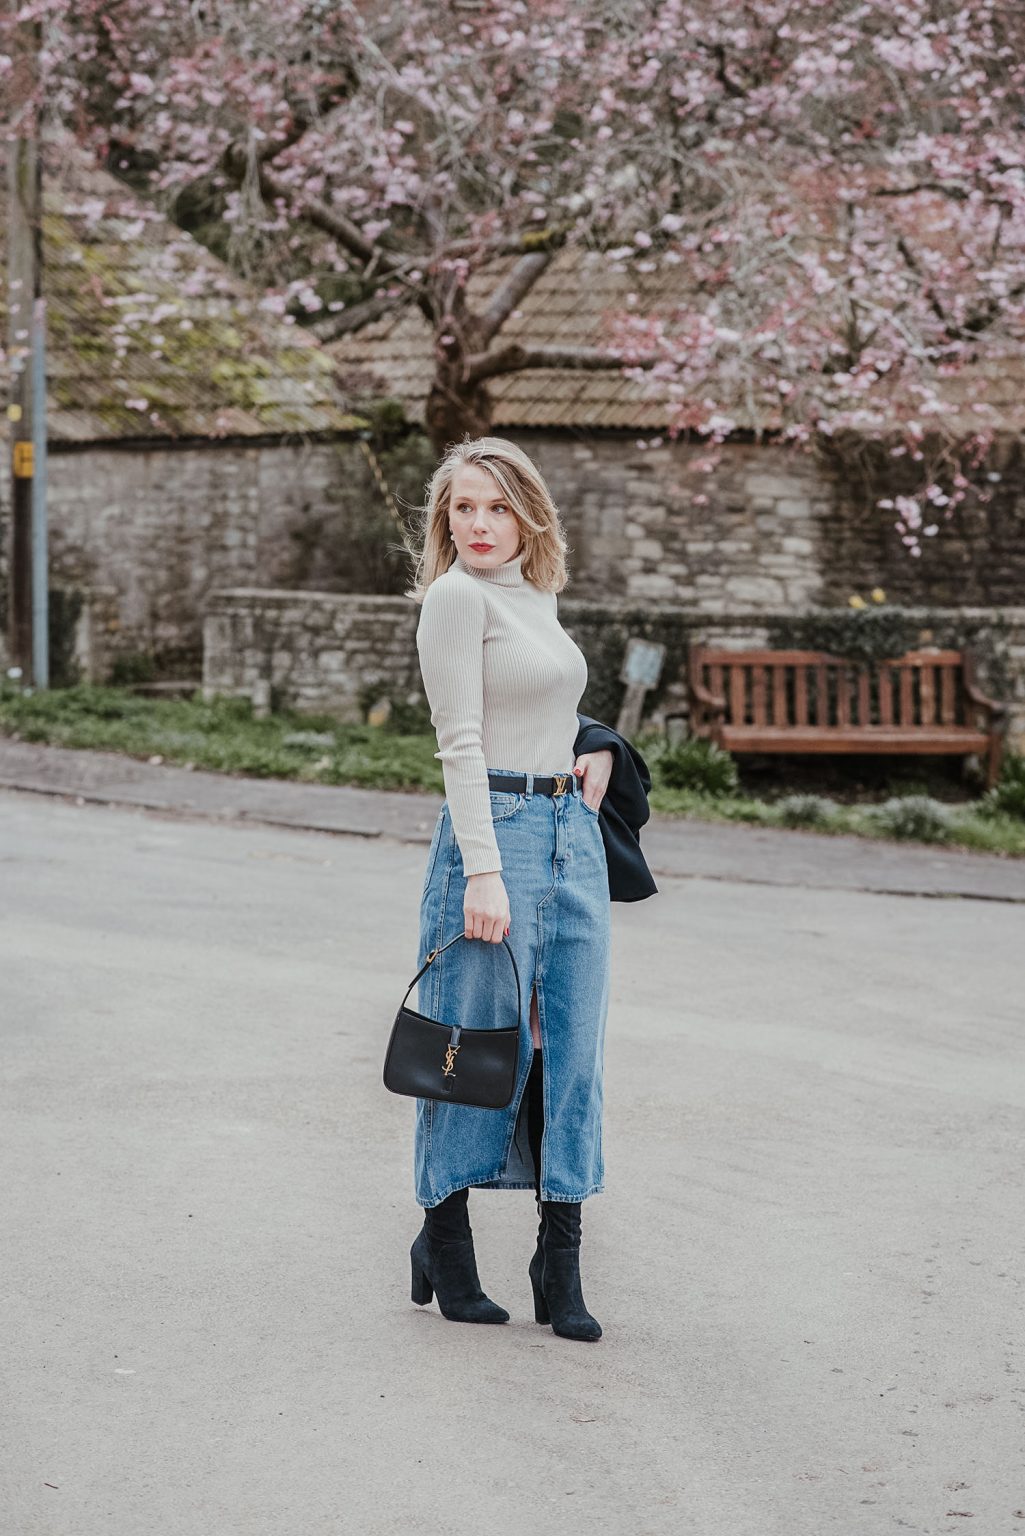 The Denim Maxi Skirt Trend – How To Wear It – THE JEANS BLOG